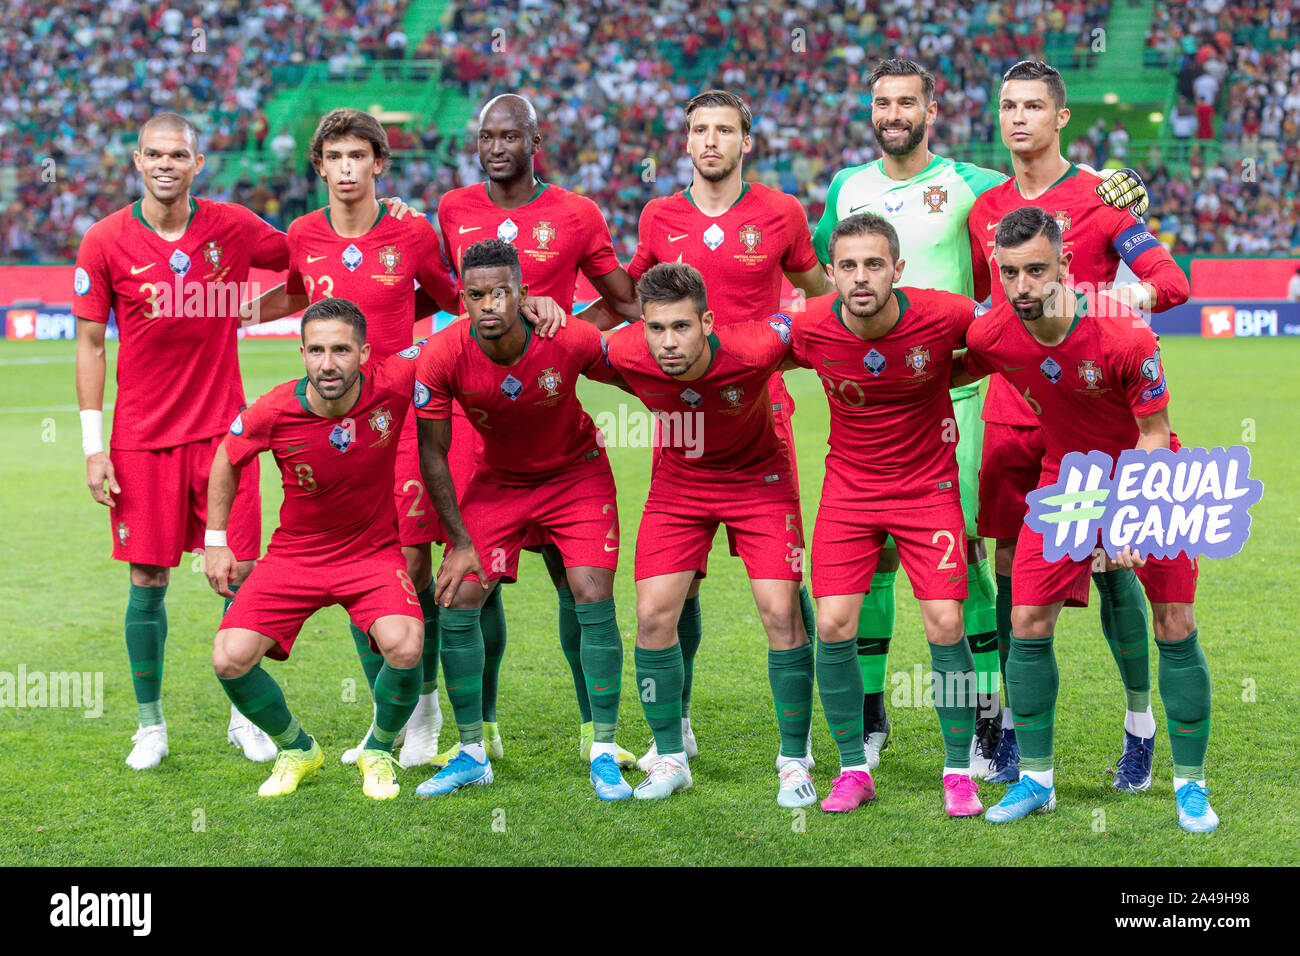 October 11, 2019. Lisbon, Portugal. Portugal starting team for the game of the European Championship 2020 Qualifying Round between Portugal and Luxembourg © Alexandre de Sousa/Alamy Live News Stock Photo